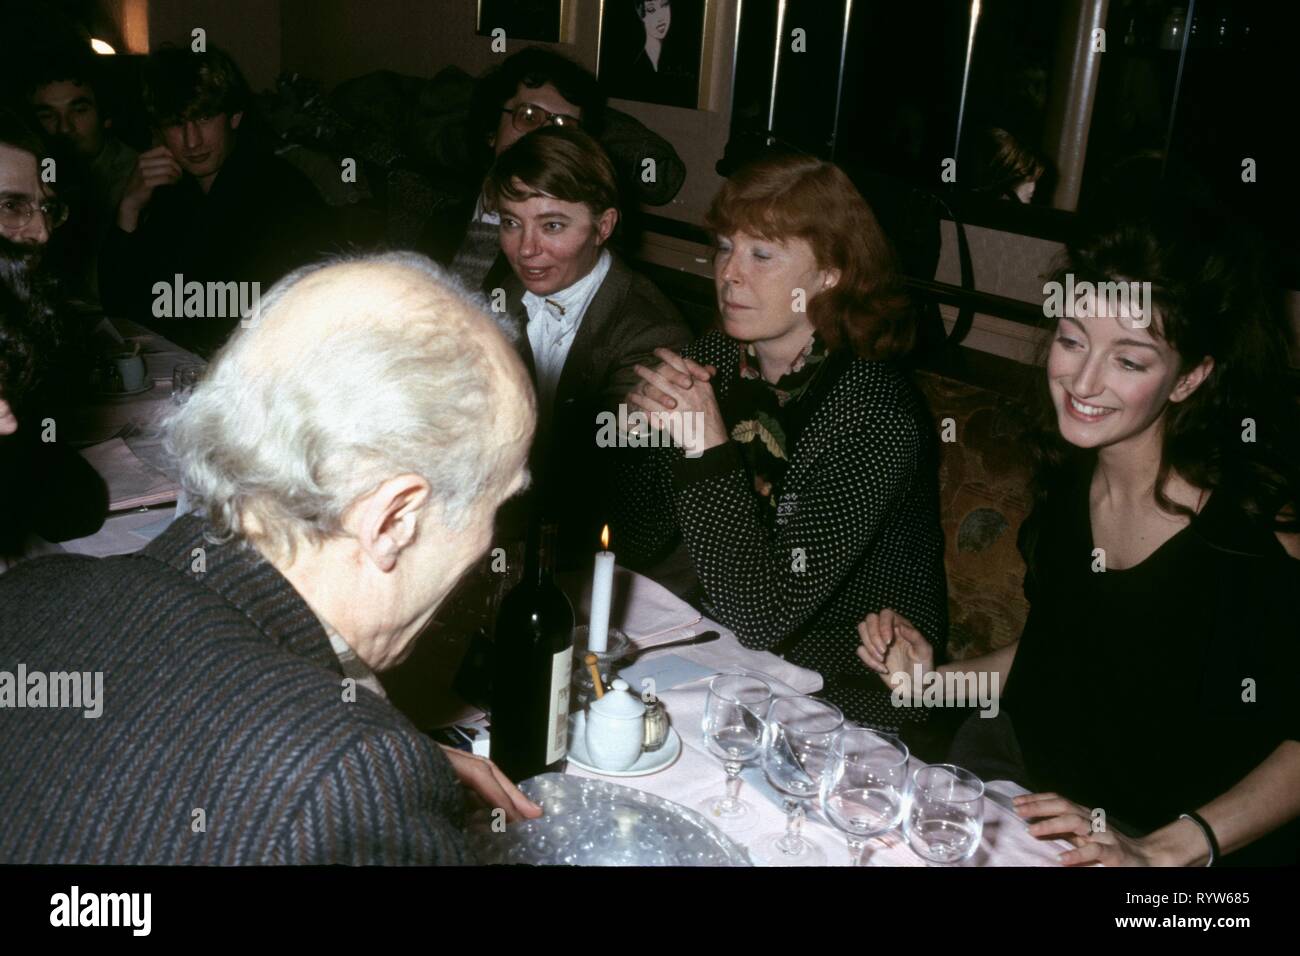 Dinner during the shooting of the film 'Les Nuits de la pleine lune' by Eric Rohmer. Foreground: Eric Rohmer In the background, from left to right: French producer of Les Films du Losange Margaret Menegoz, Aurore Clément and Pascale Ogier. 1984 Stock Photo